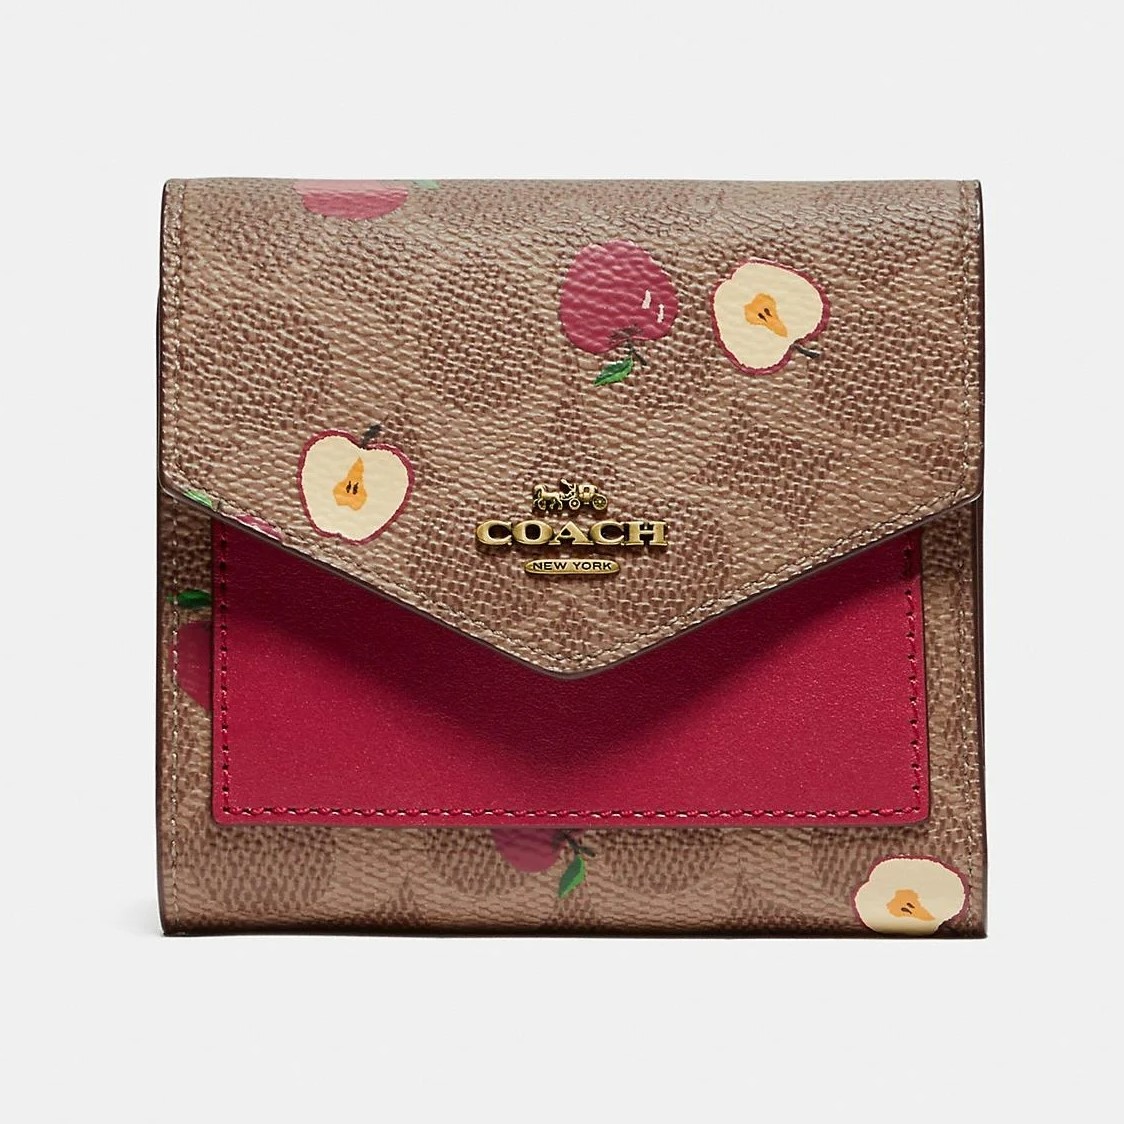 VÍ NGẮN NỮ COACH TRÁI TÁO NẤP BÌA THƯ SMALL WALLET IN SIGNATURE CANVAS WITH SCATTERED APPLE PRINT 3